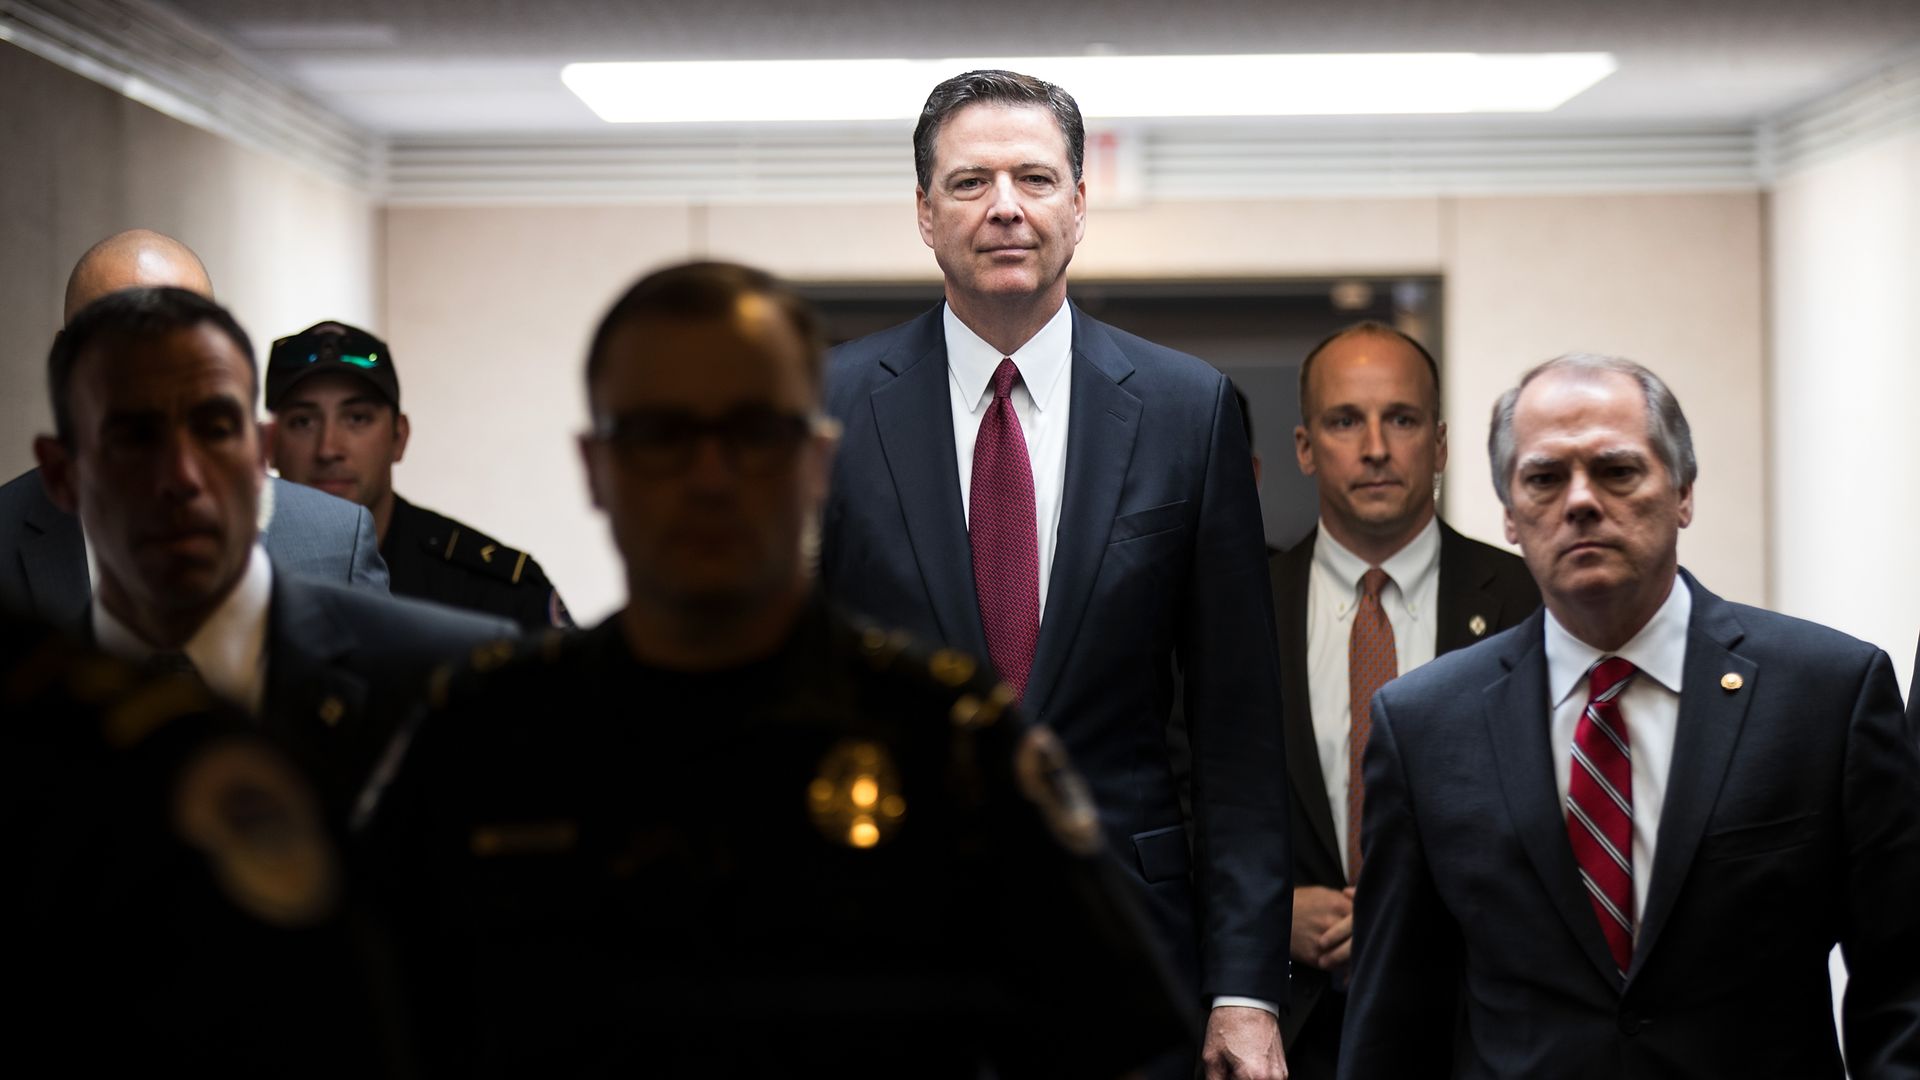 Comey walks down a hallway surrounded by security